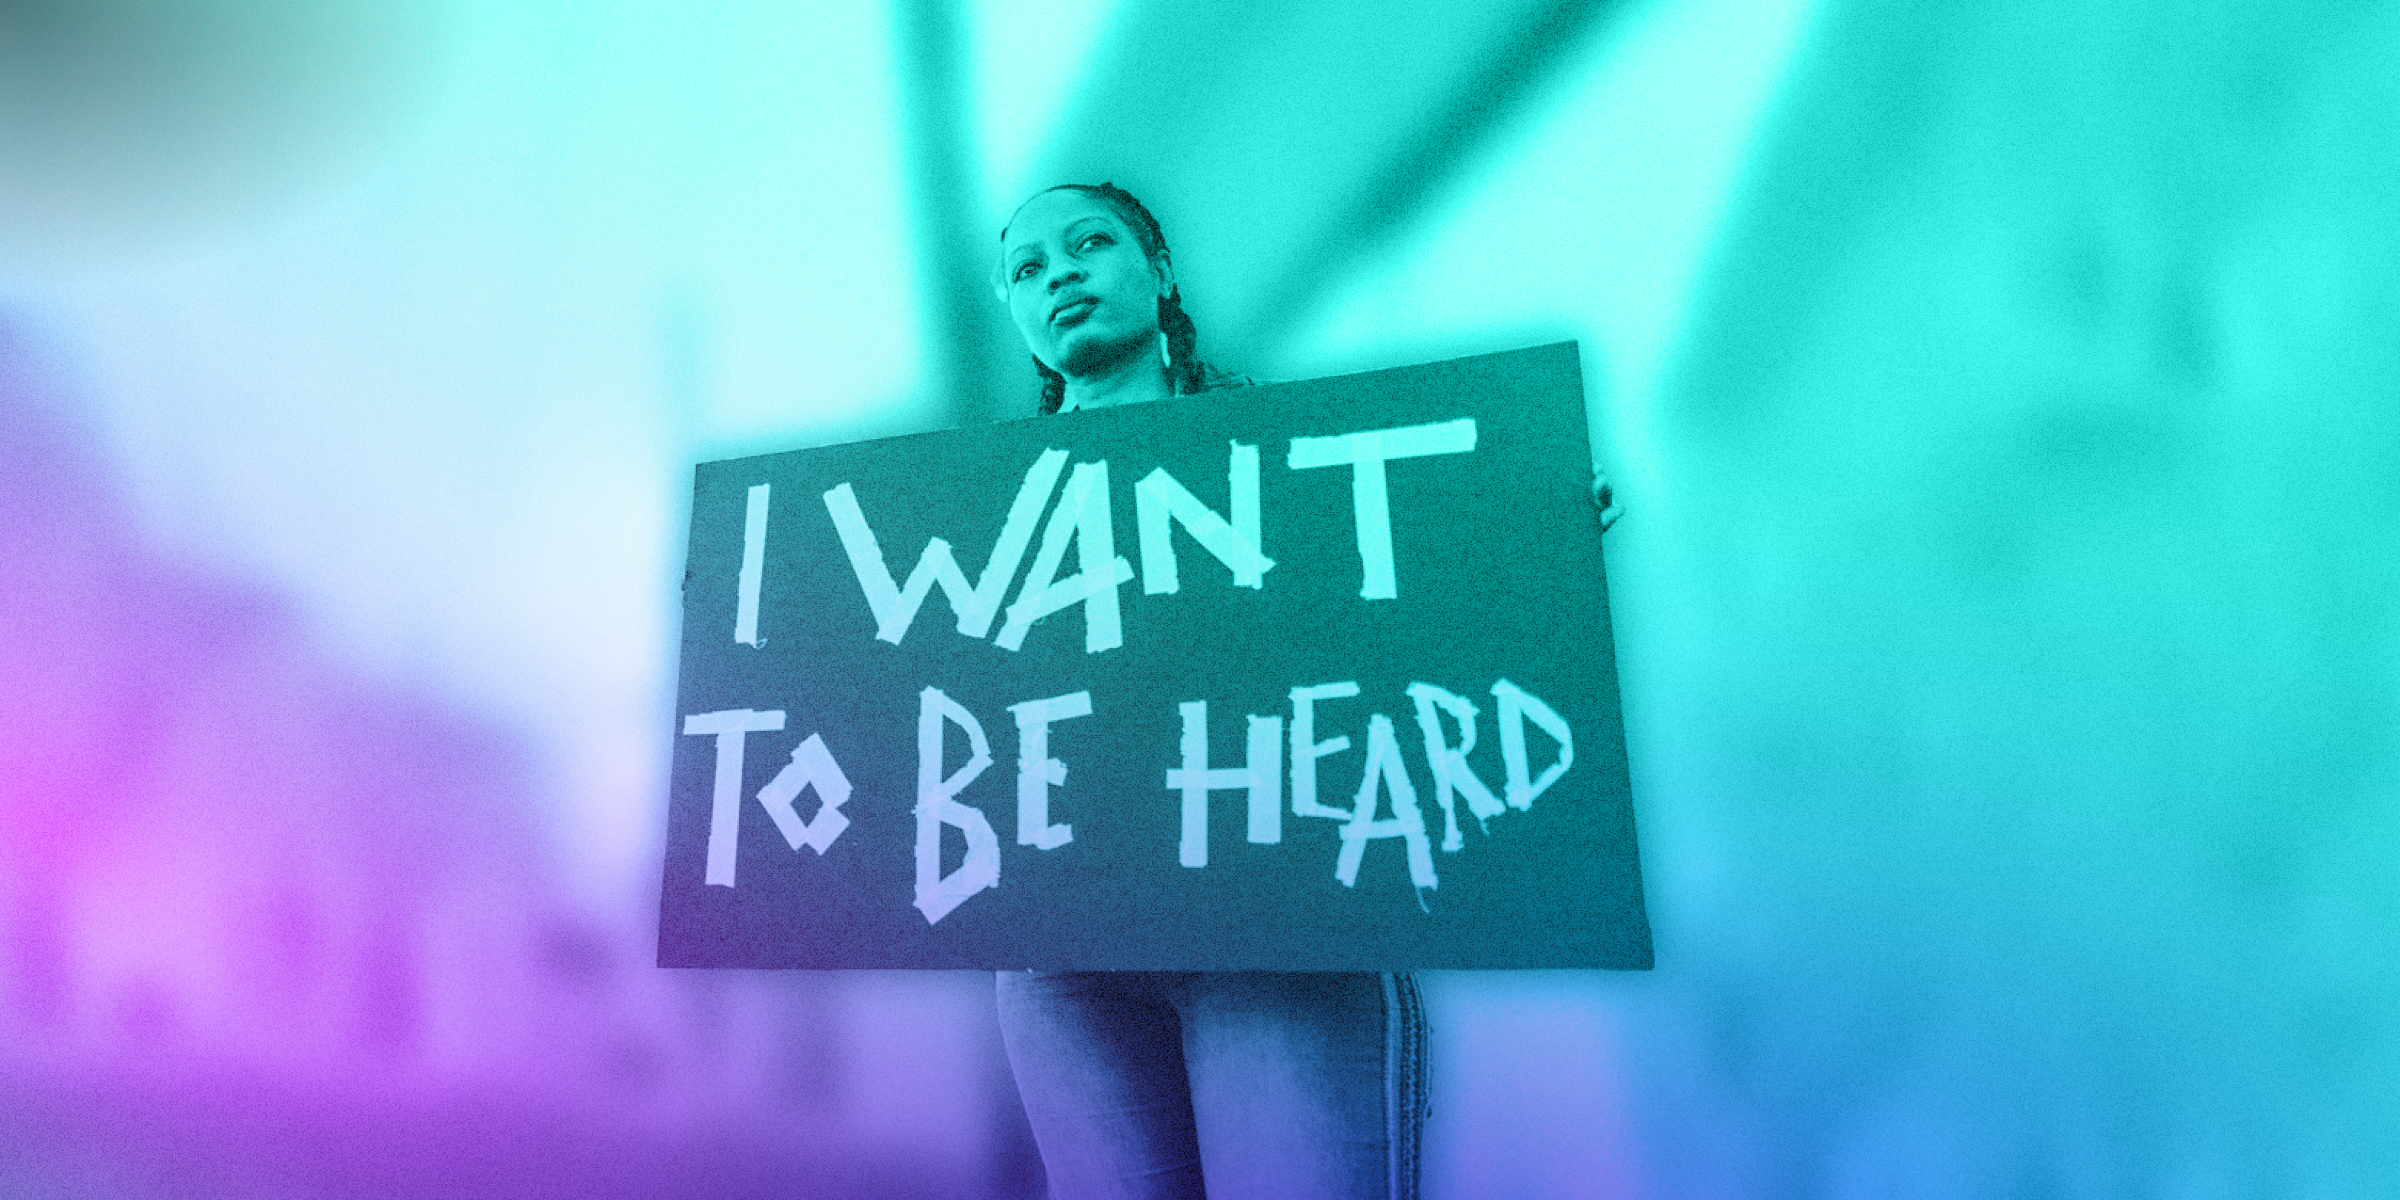 Young person holding up a cardboard sign with "I want to be heard" written on it